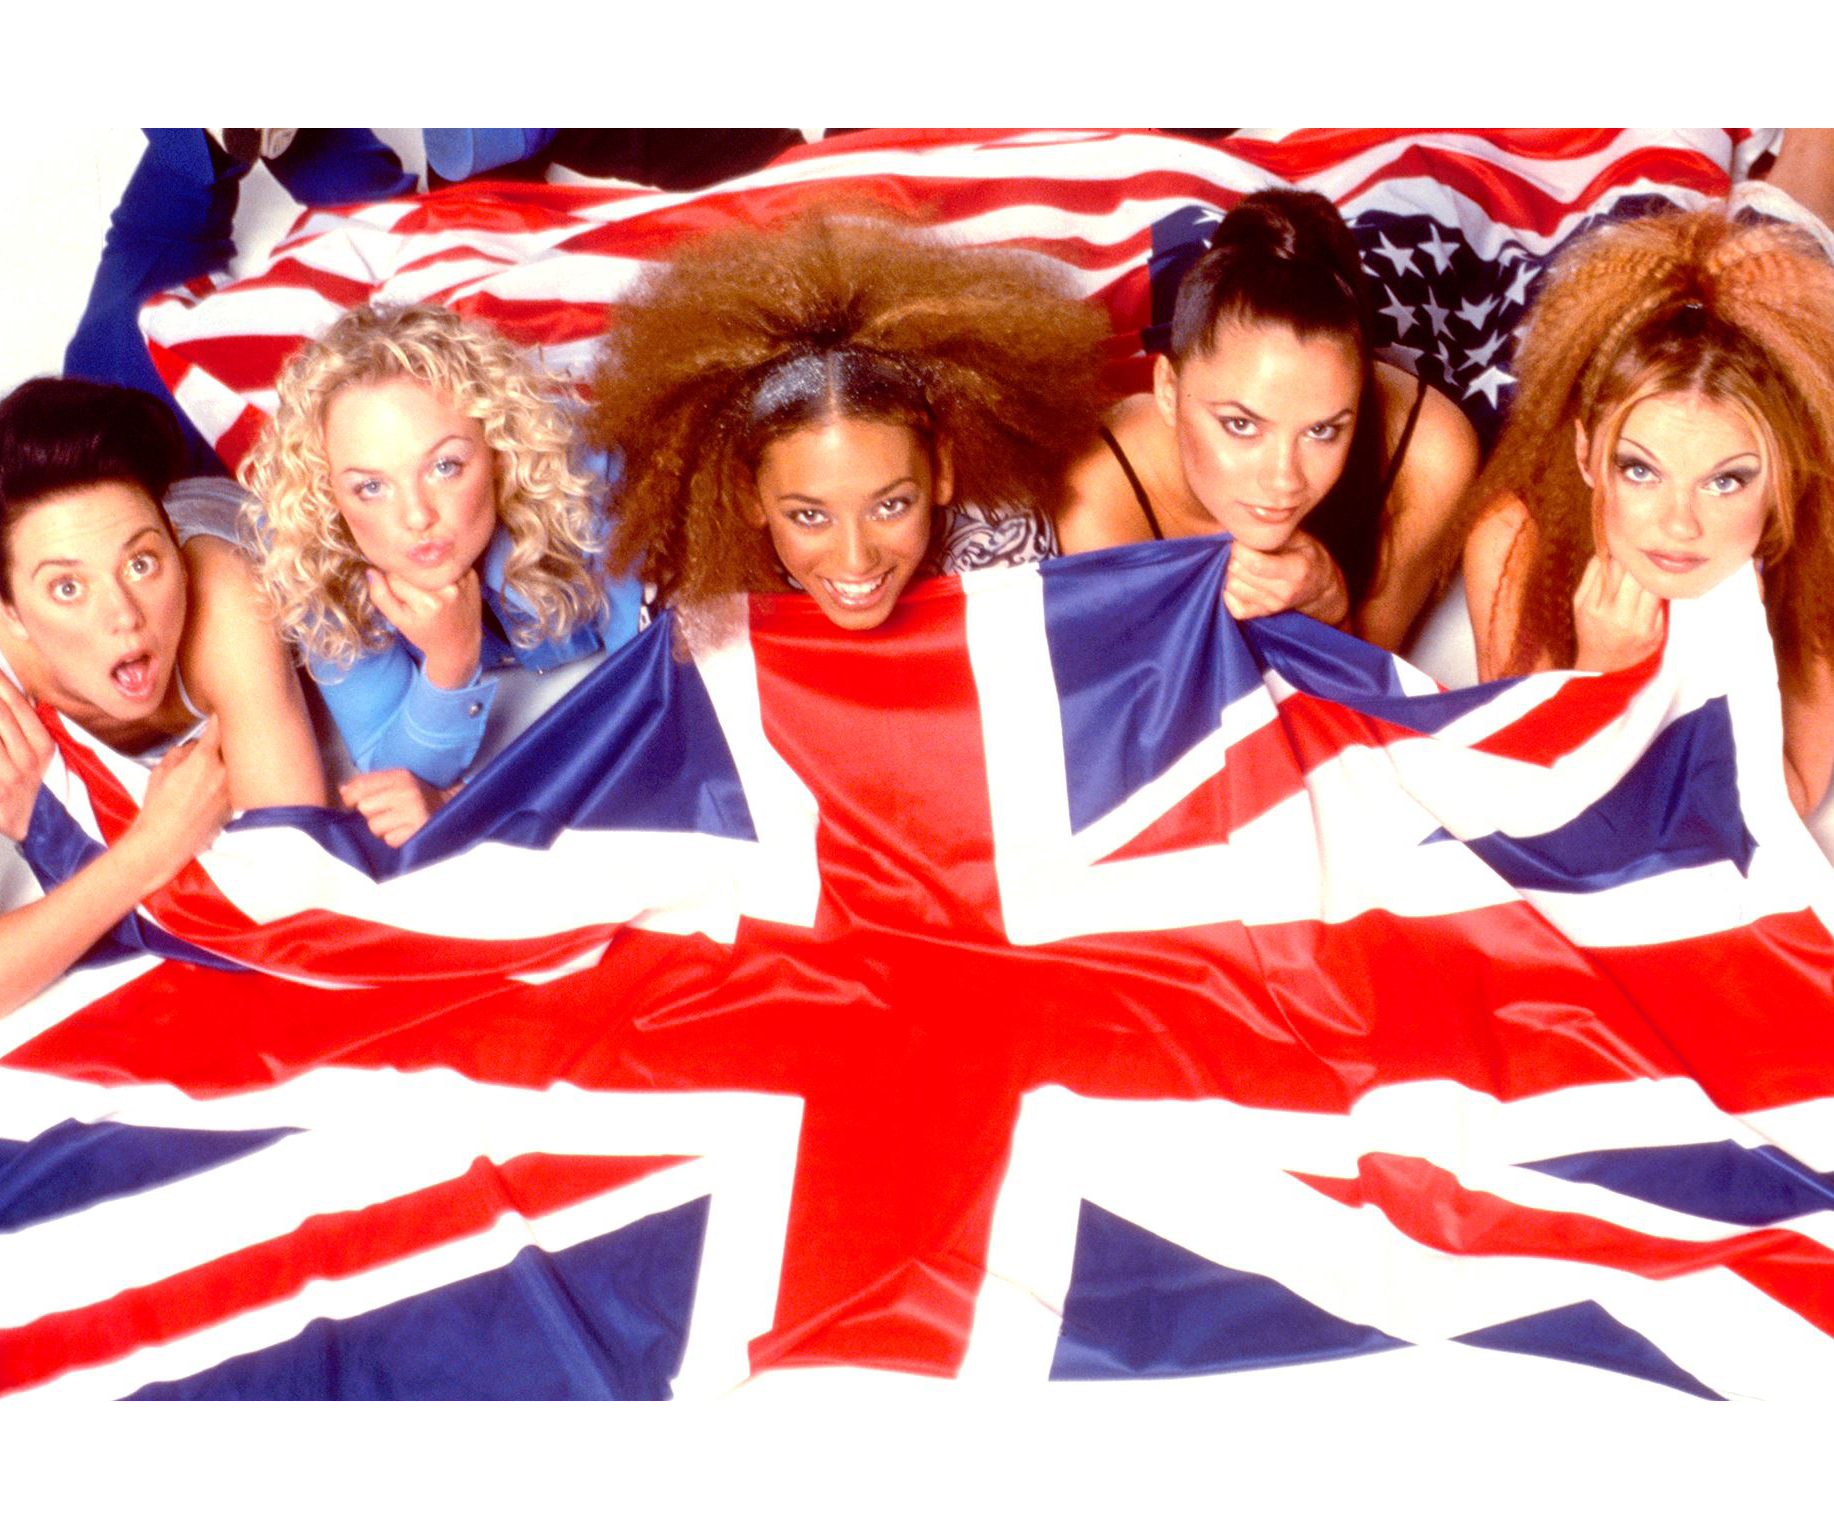 A Spice Girls reunion is happening!